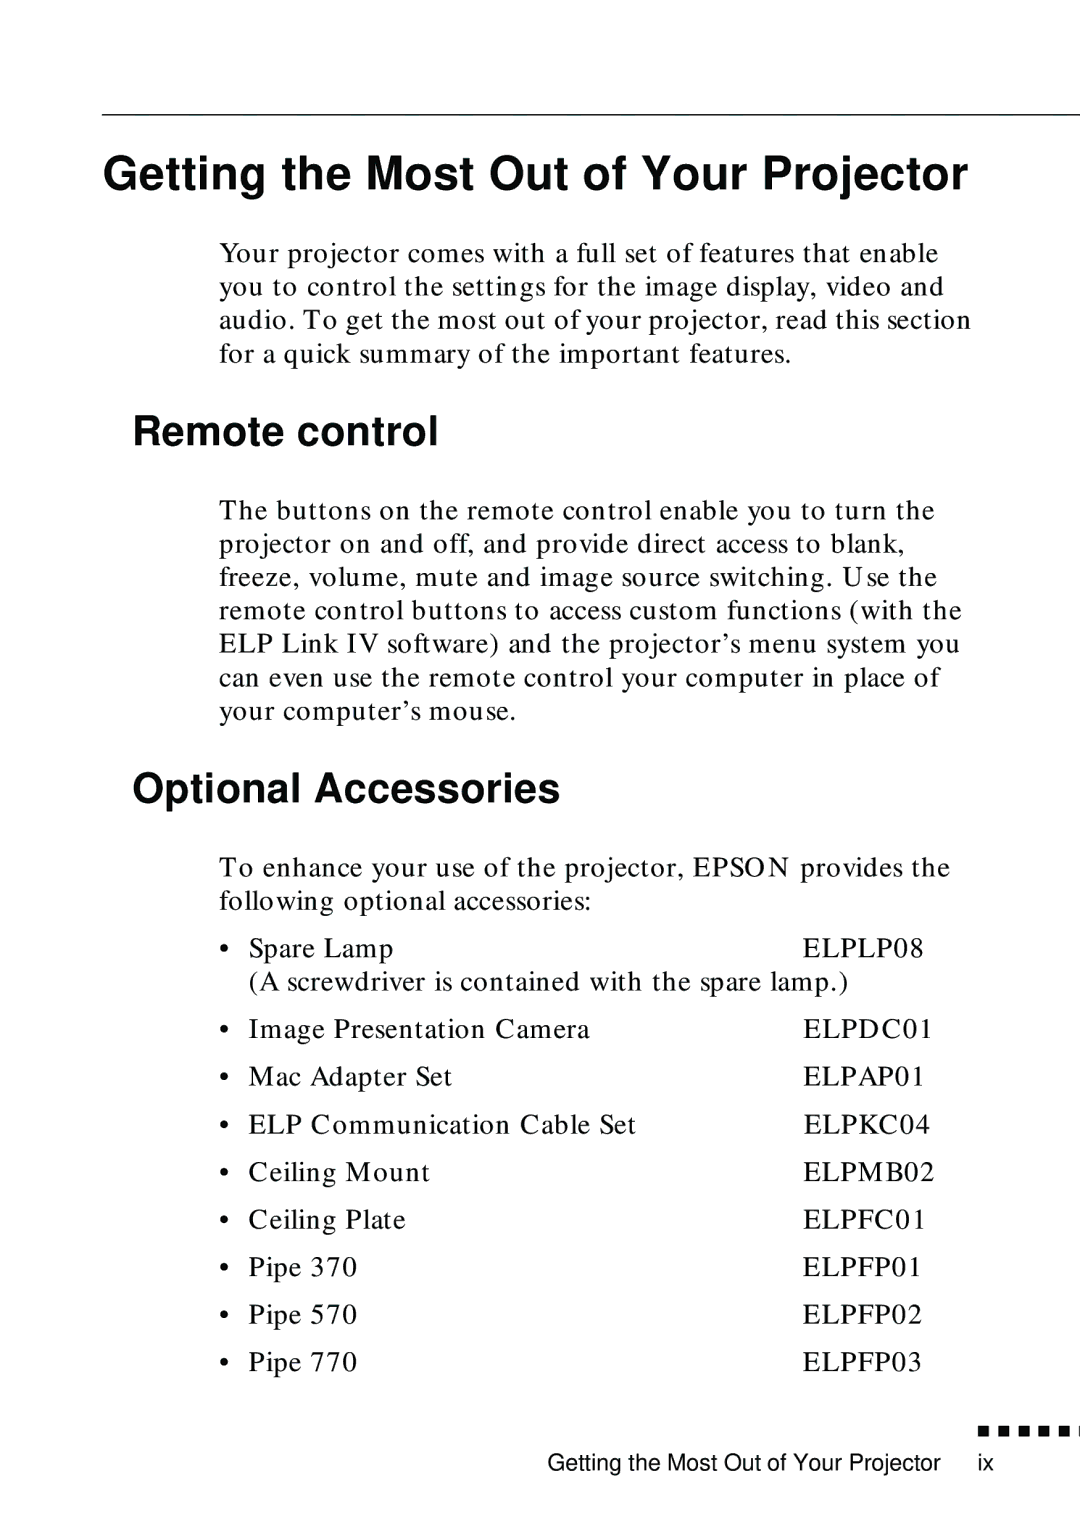 Epson EMP-8000 manual Getting the Most Out of Your Projector, Remote control, Optional Accessories 